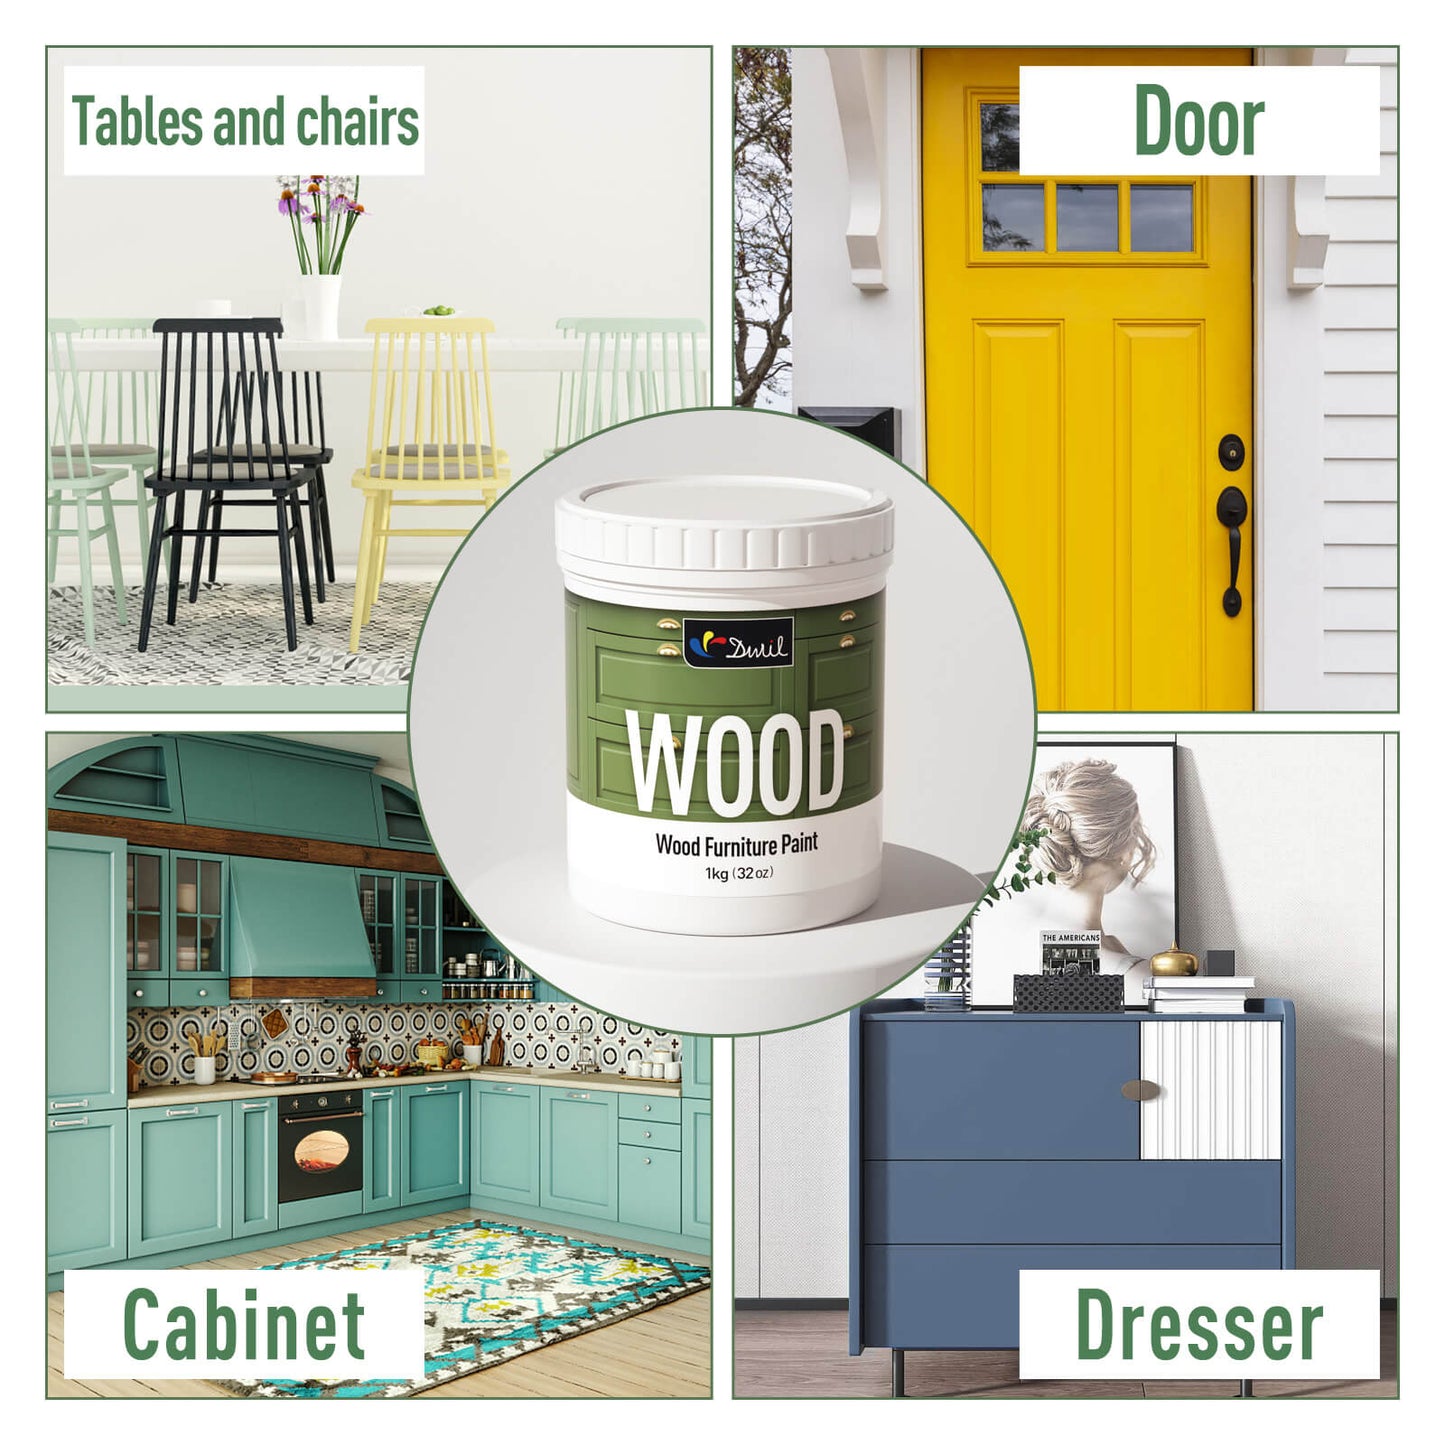 DWIL Wood Furniture Paint Kit (With Tools)